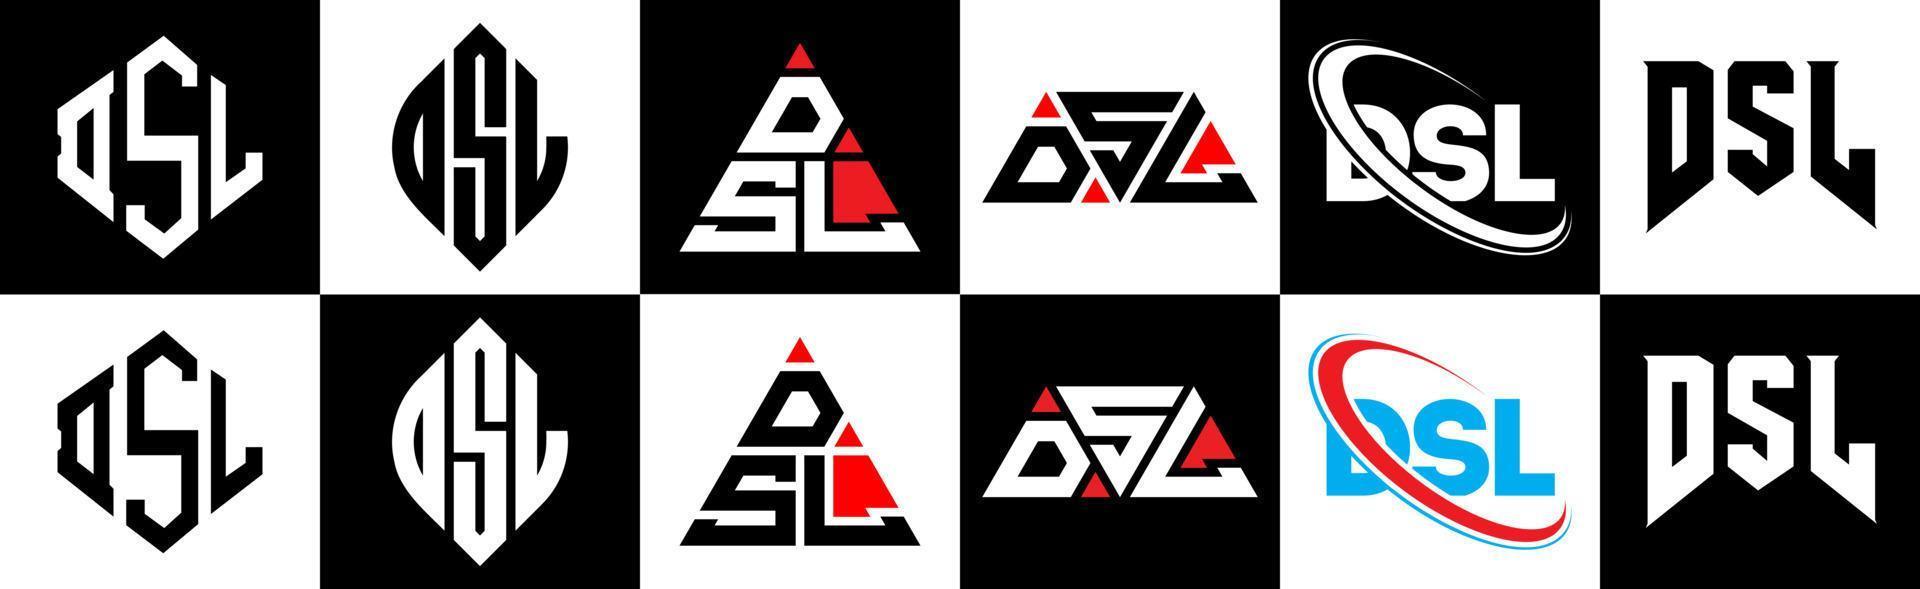 DSL letter logo design in six style. DSL polygon, circle, triangle, hexagon, flat and simple style with black and white color variation letter logo set in one artboard. DSL minimalist and classic logo vector